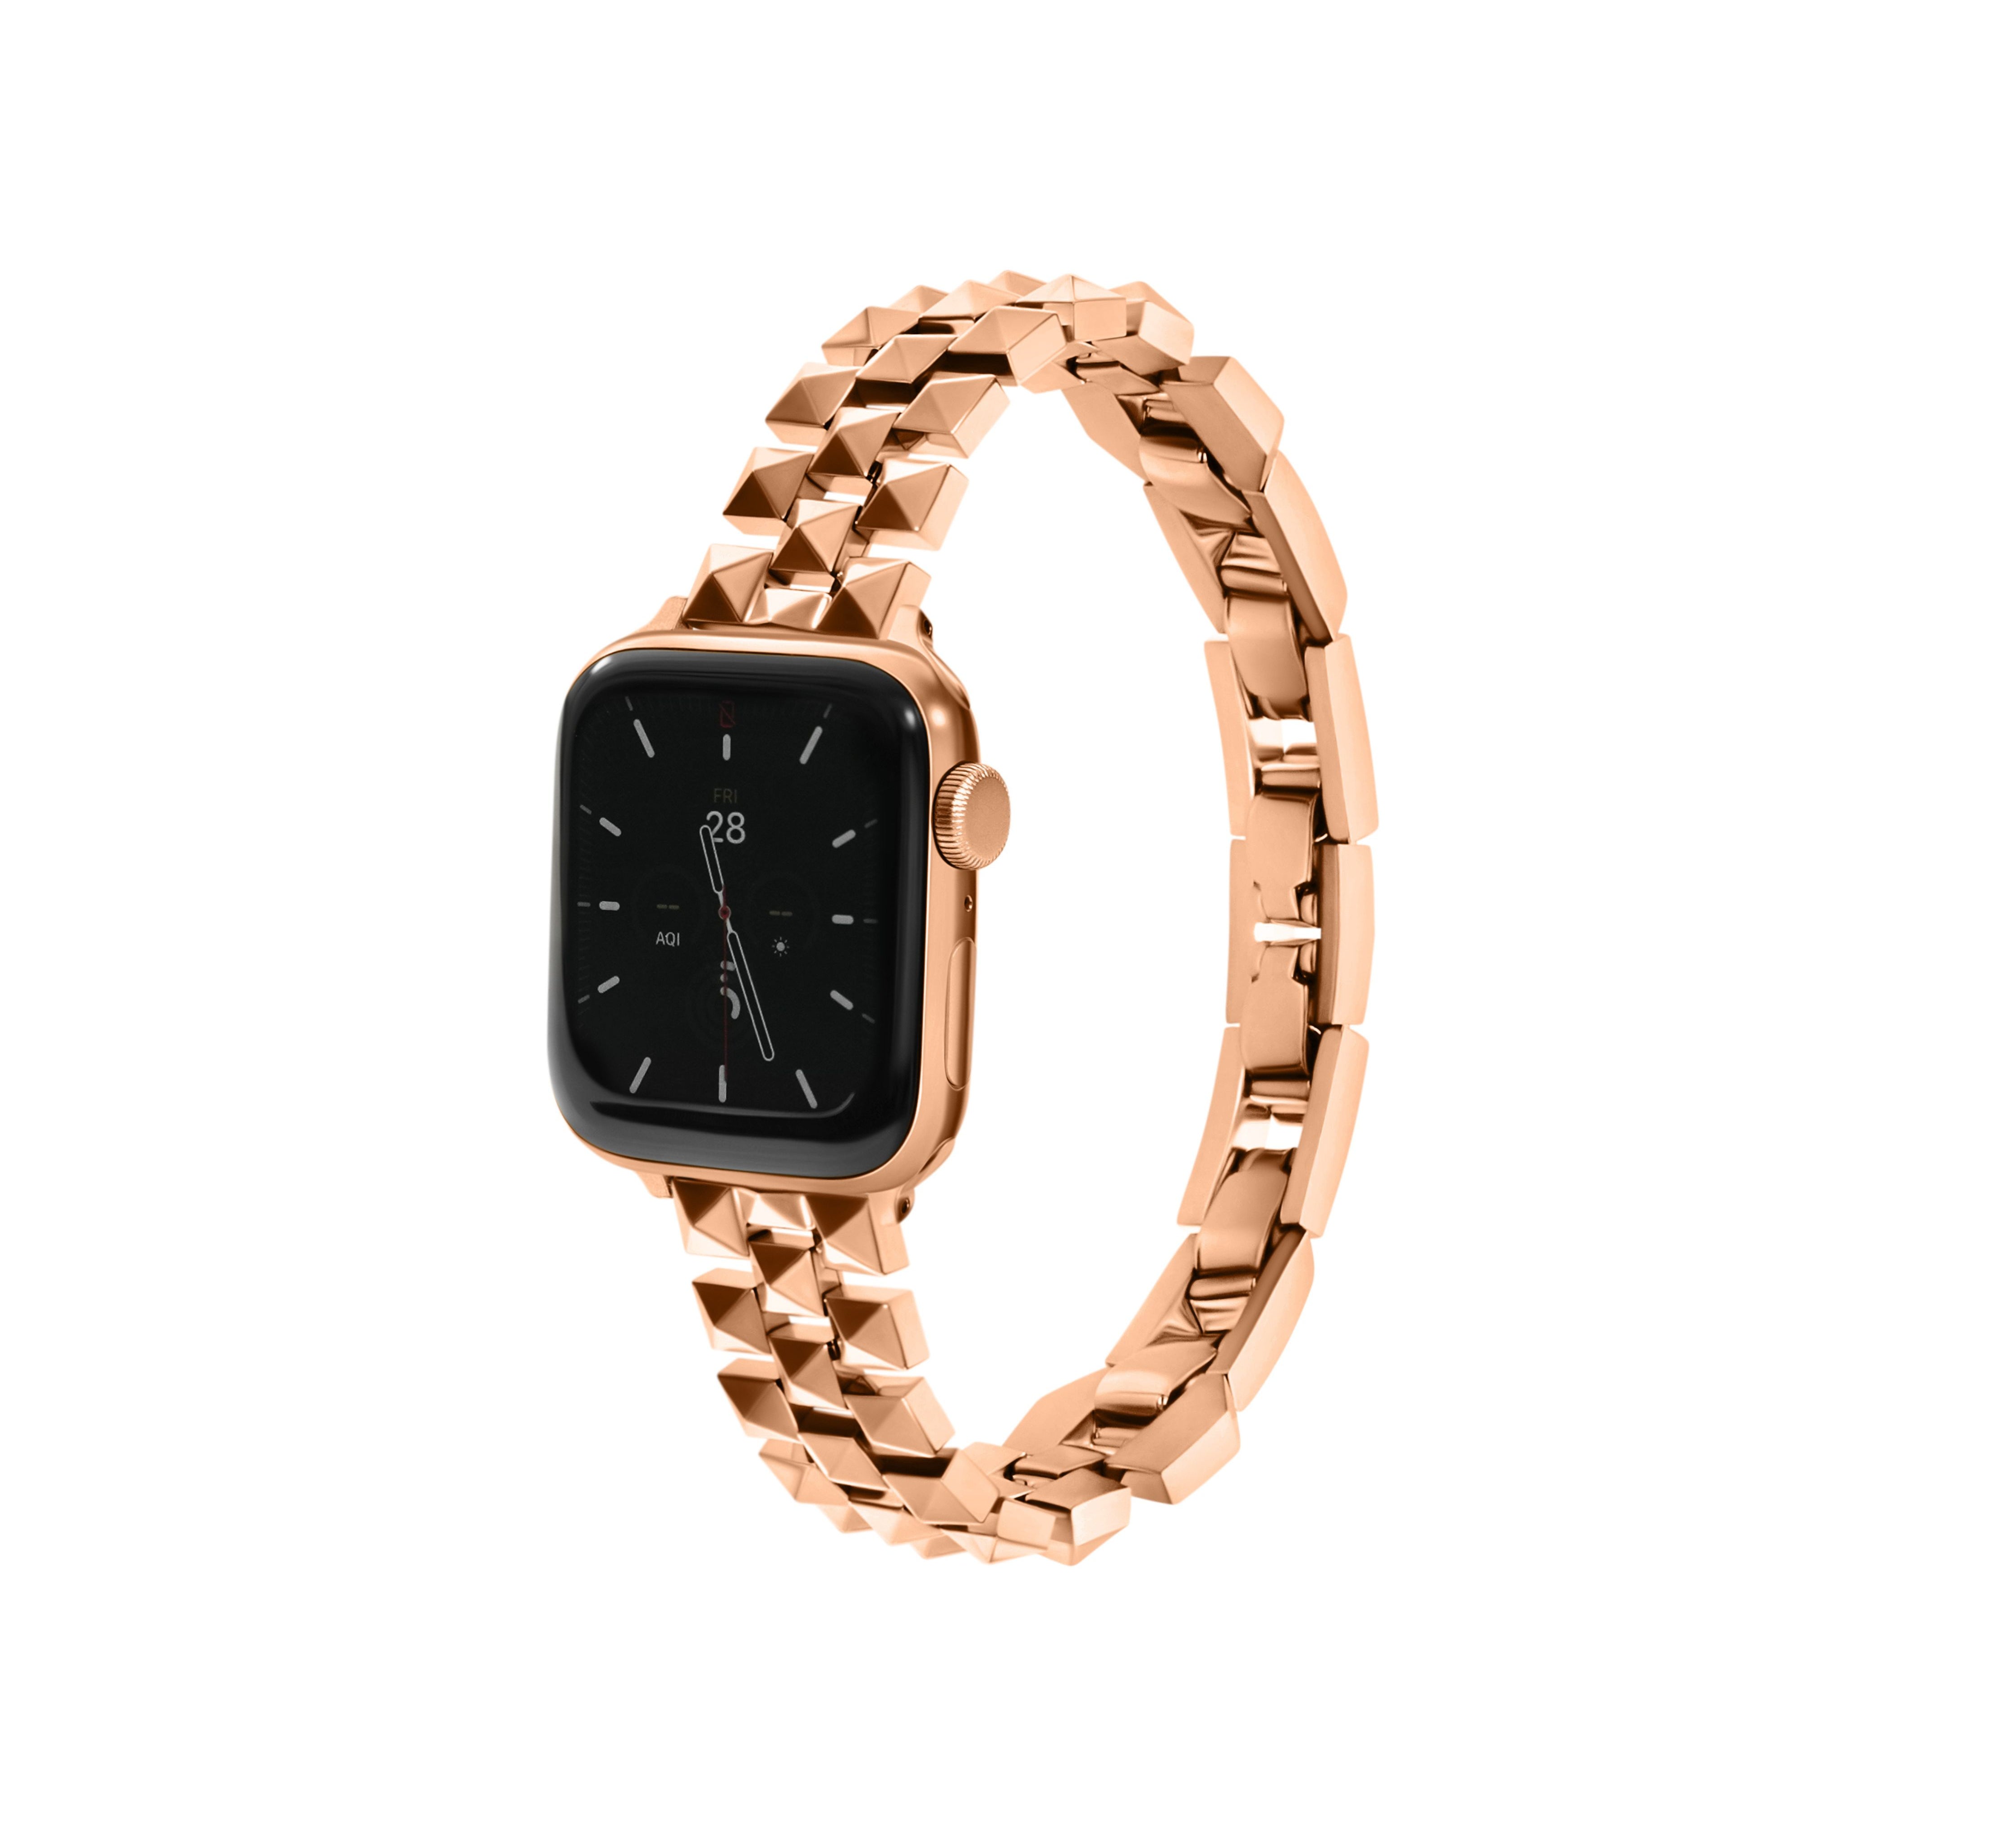 NEW! Stud Band for the Apple Watch - Goldenerre Women's Apple Watch Bands and Jewelry